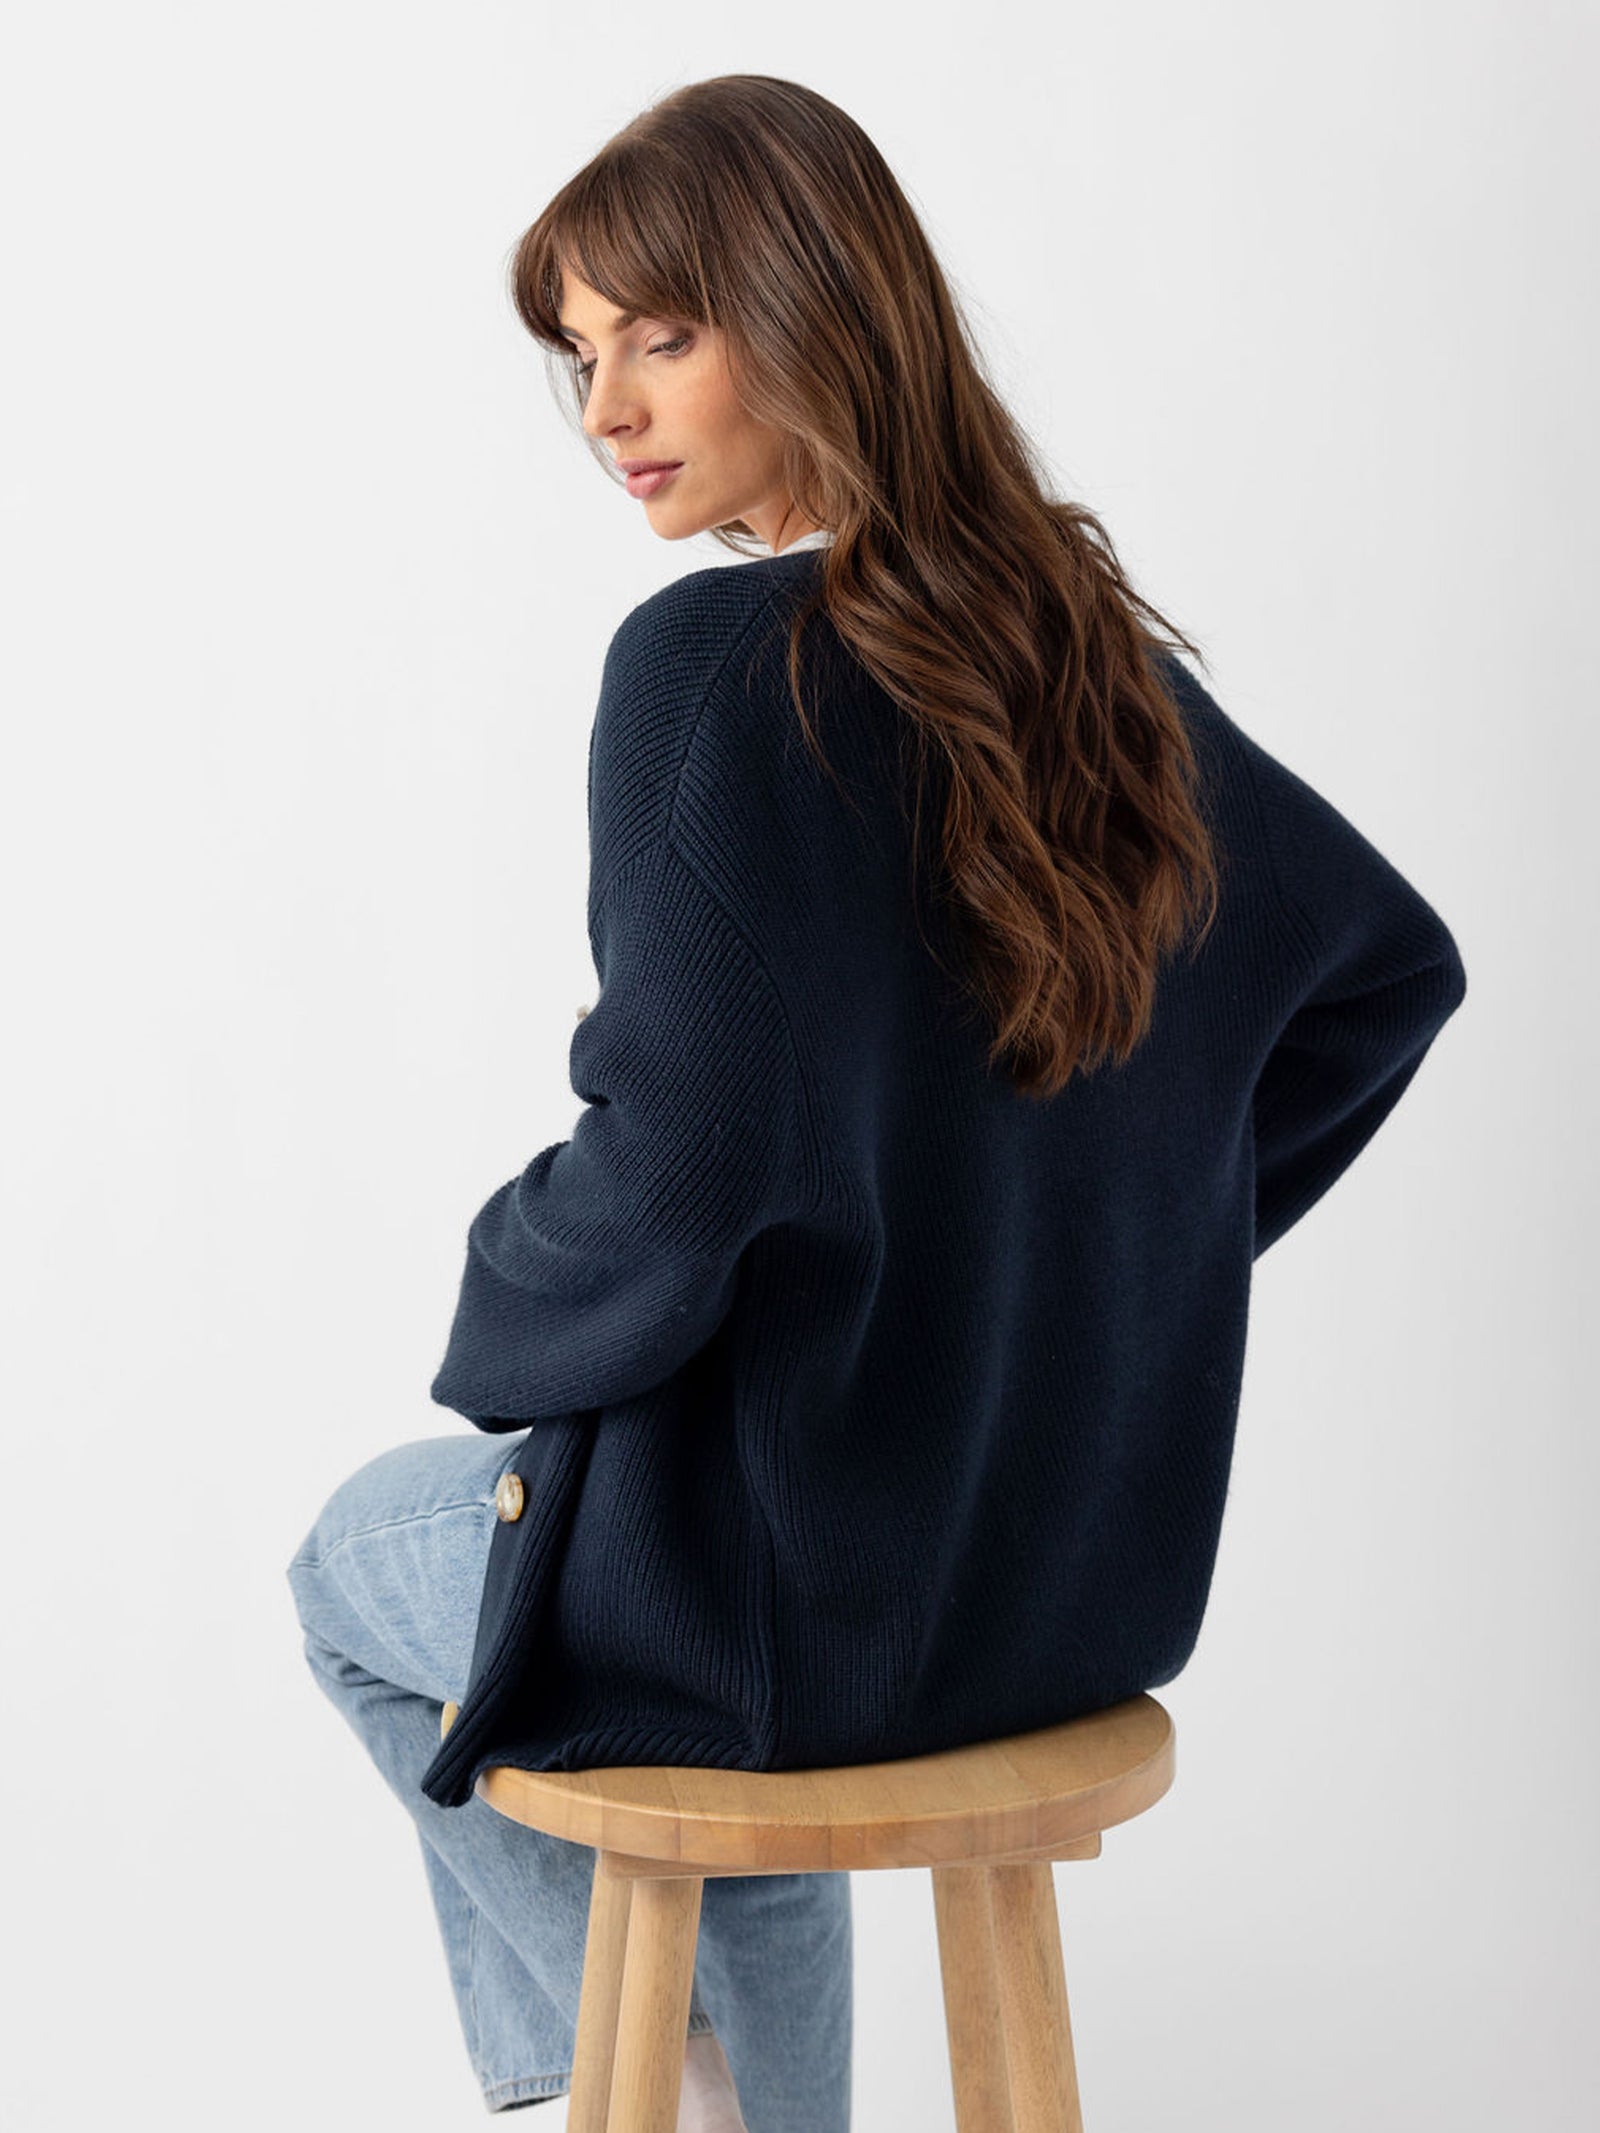 Back of woman in eclipse cardigan sitting on wooden stool 